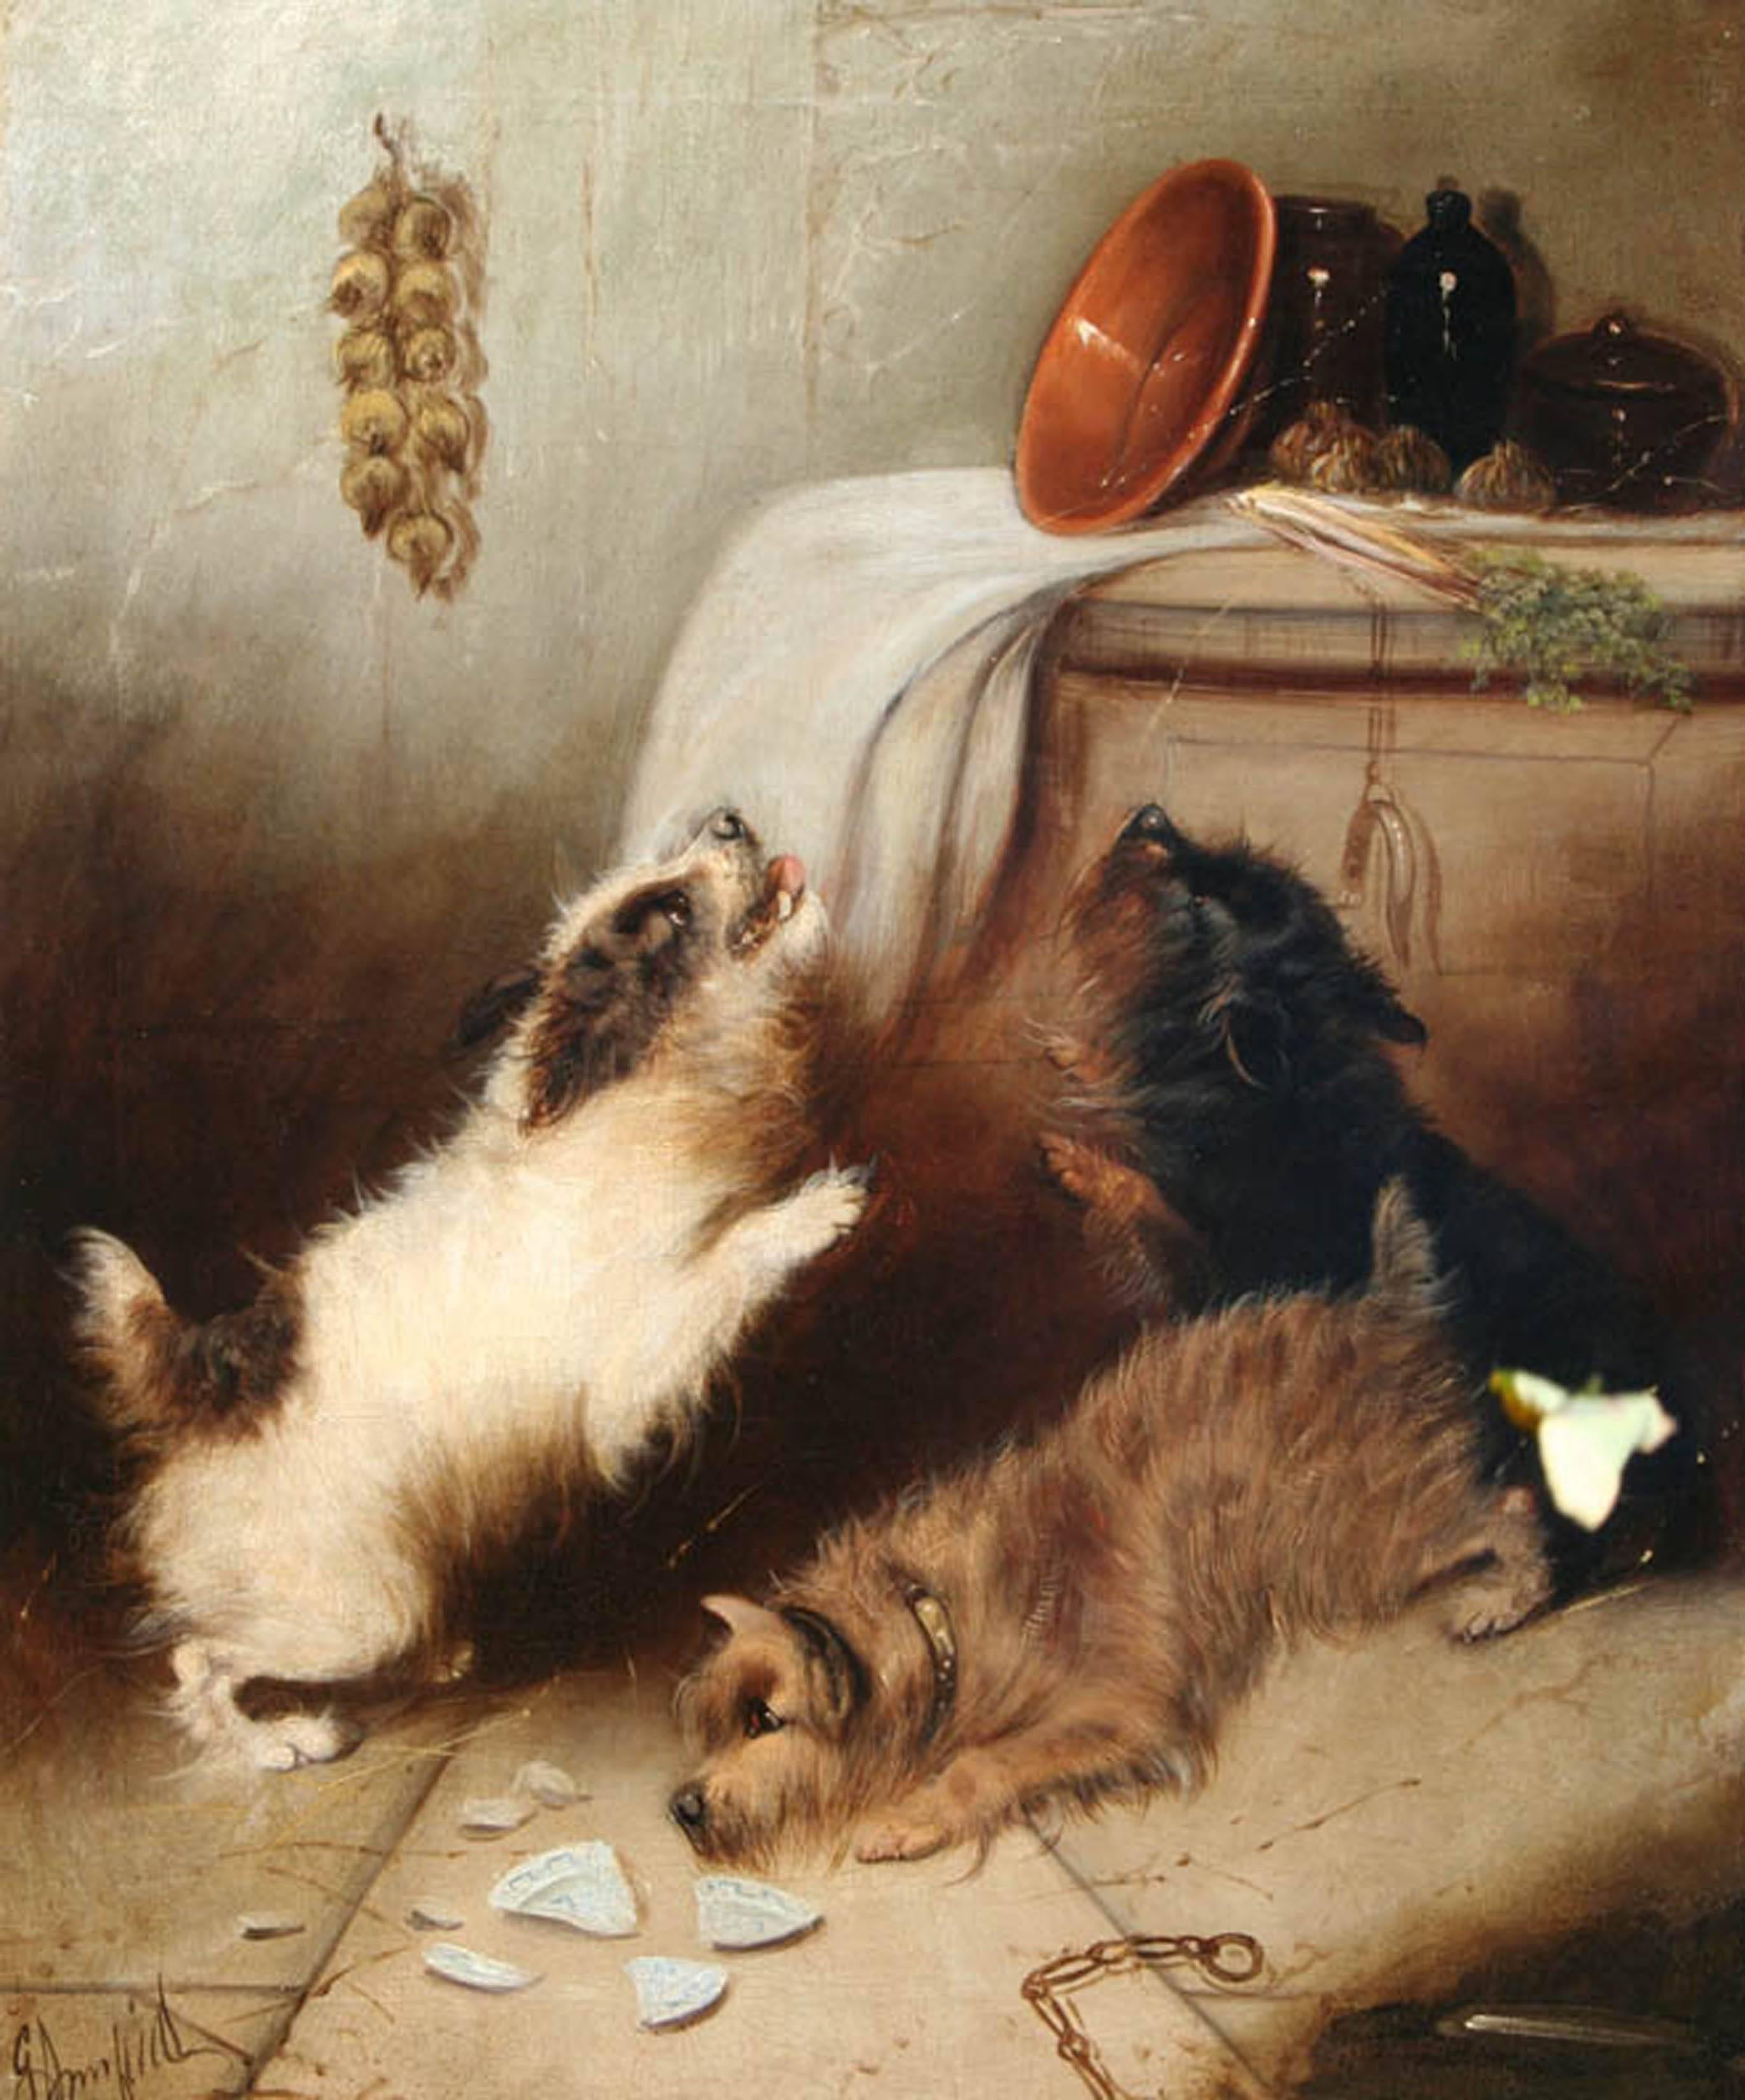 George Armfield (English, 1808-1893).

Mischevious Terriers. 

Oil on canvas, signed. 

Provenance: From the estate of celebrity Clarivoyant Jean Dixon. 

Painting size: 24” x 20”.
Frame size: 31” x 35.5”.

Goerge Armfield, known as